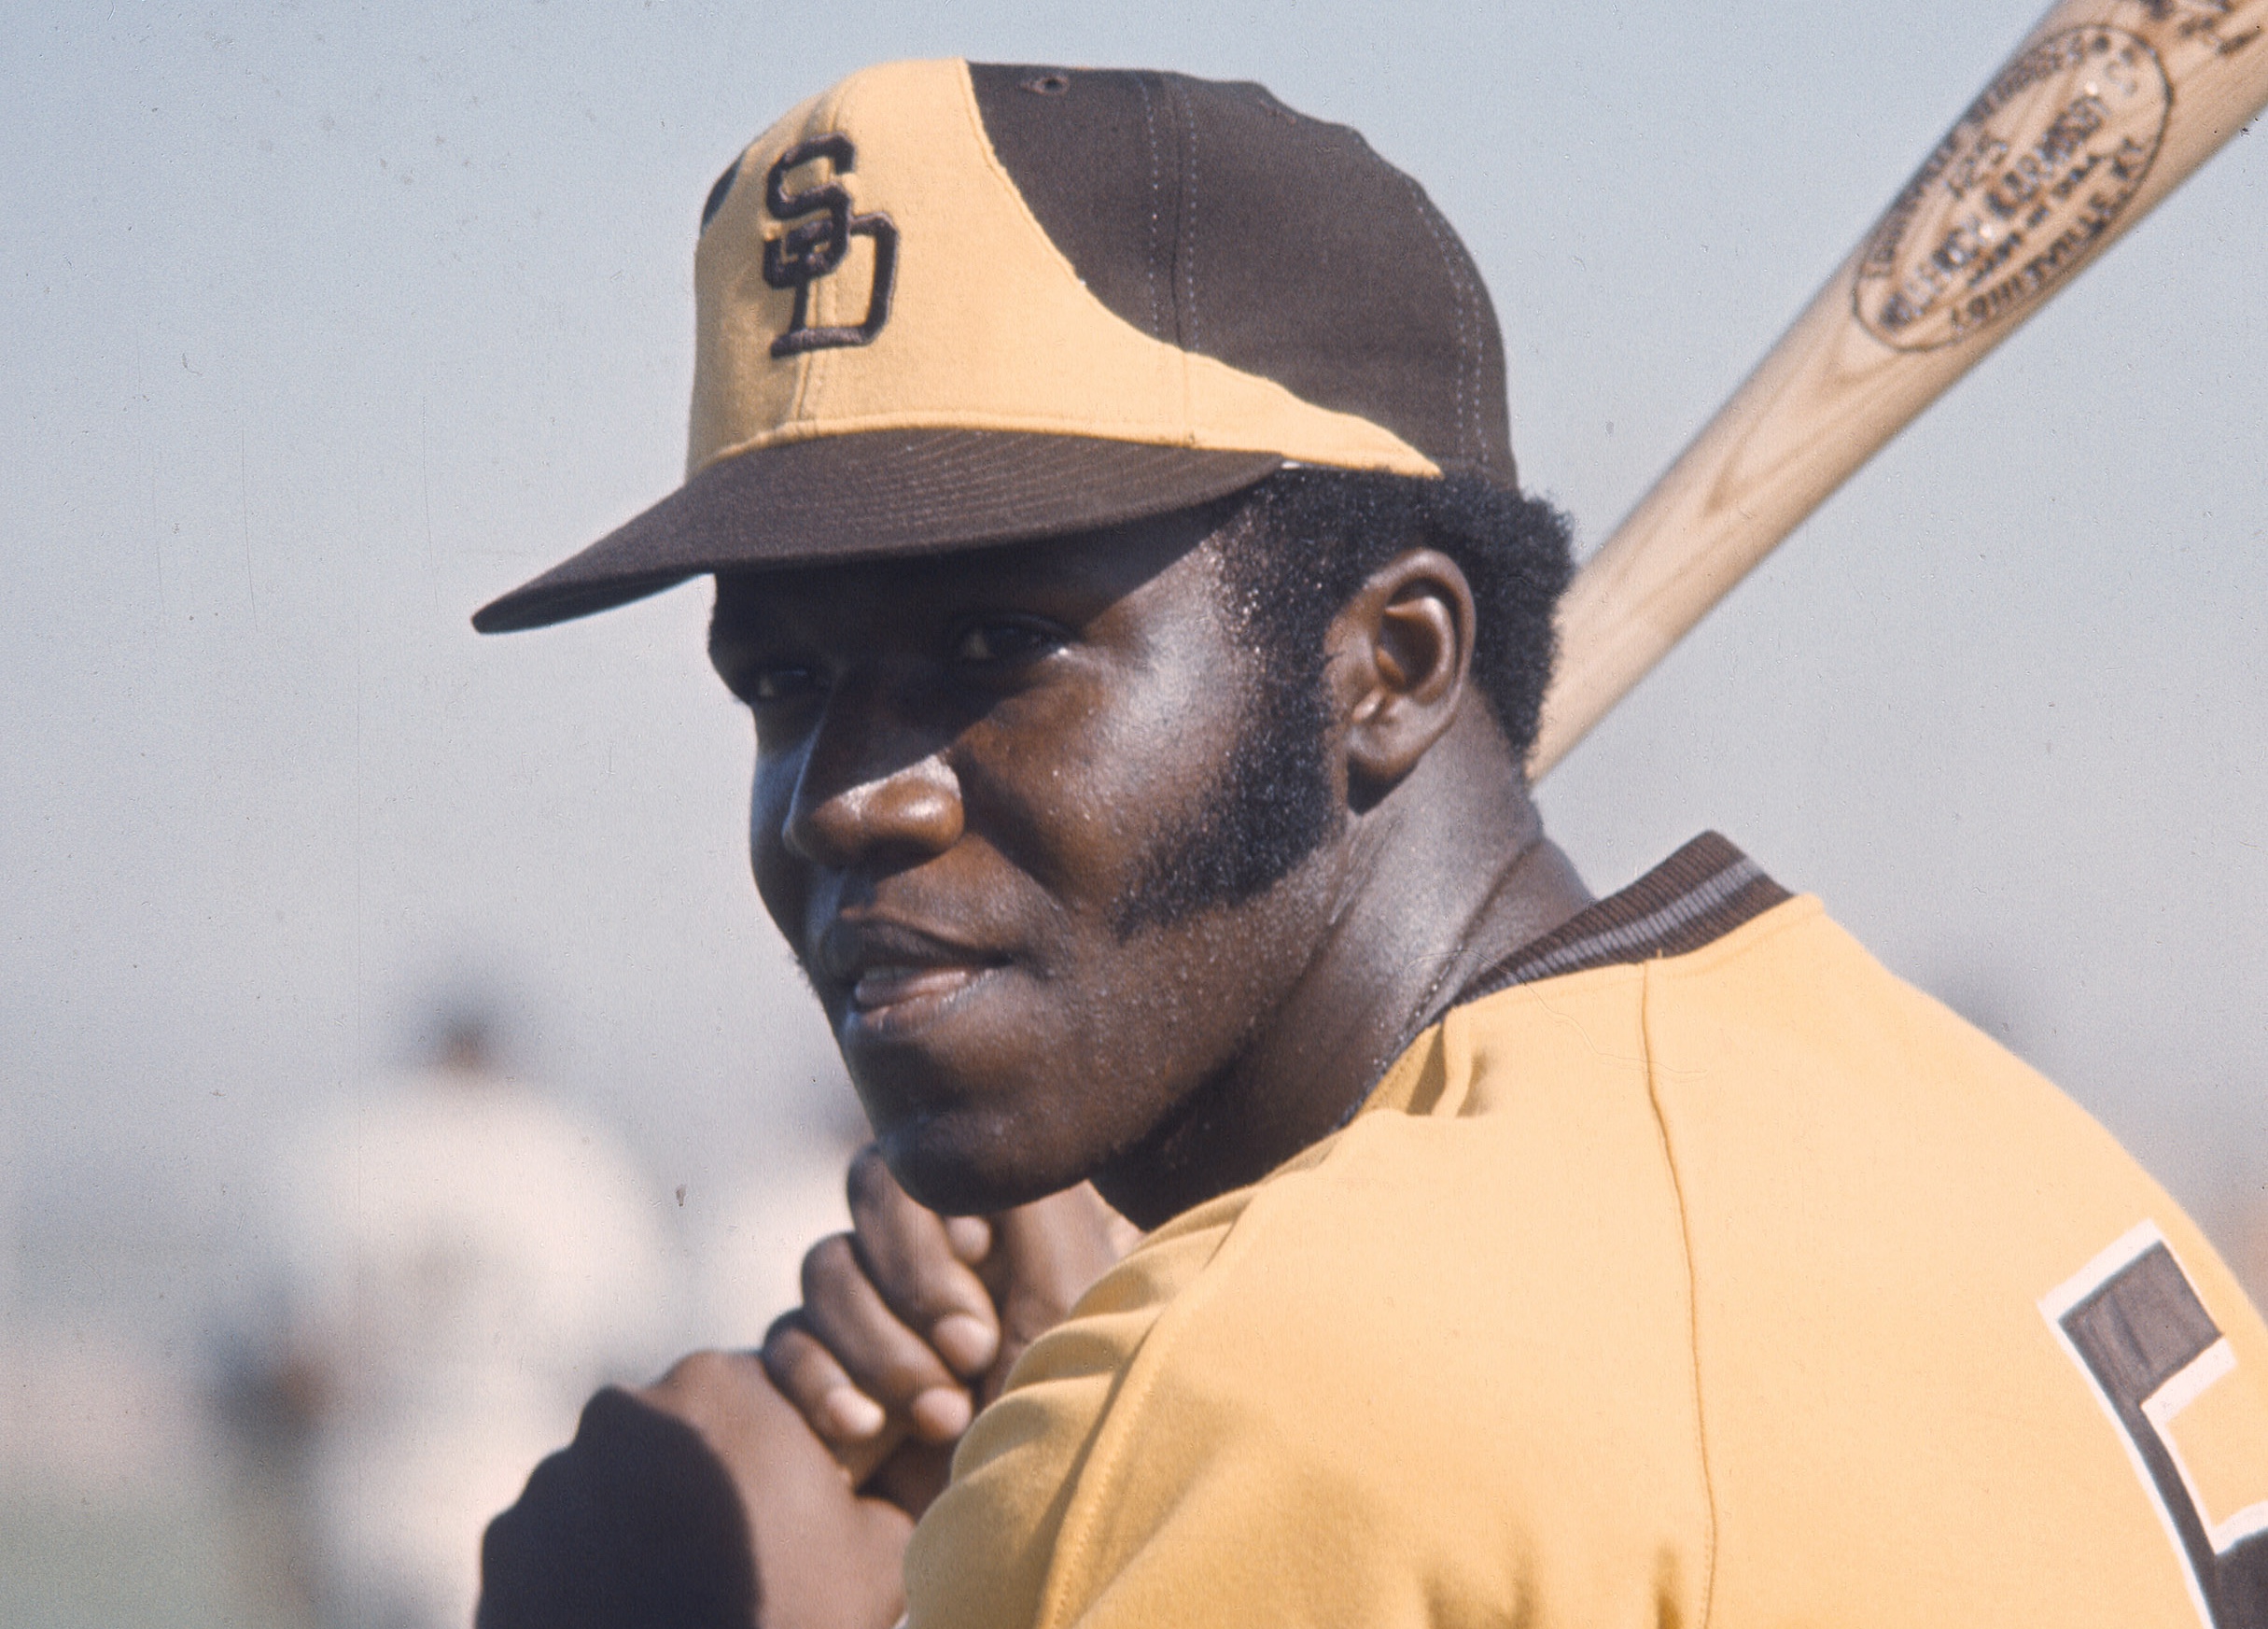 UNSPECIFIED - CIRCA 1969: Nate Colbert #17 of the San Diego Padres poses for this photograph before an Major League Baseball game circa 1969. Colbert played for the Padres from 1969-74. (Photo by Focus on Sport/Getty Images) *** Local Caption *** Nate Colbert